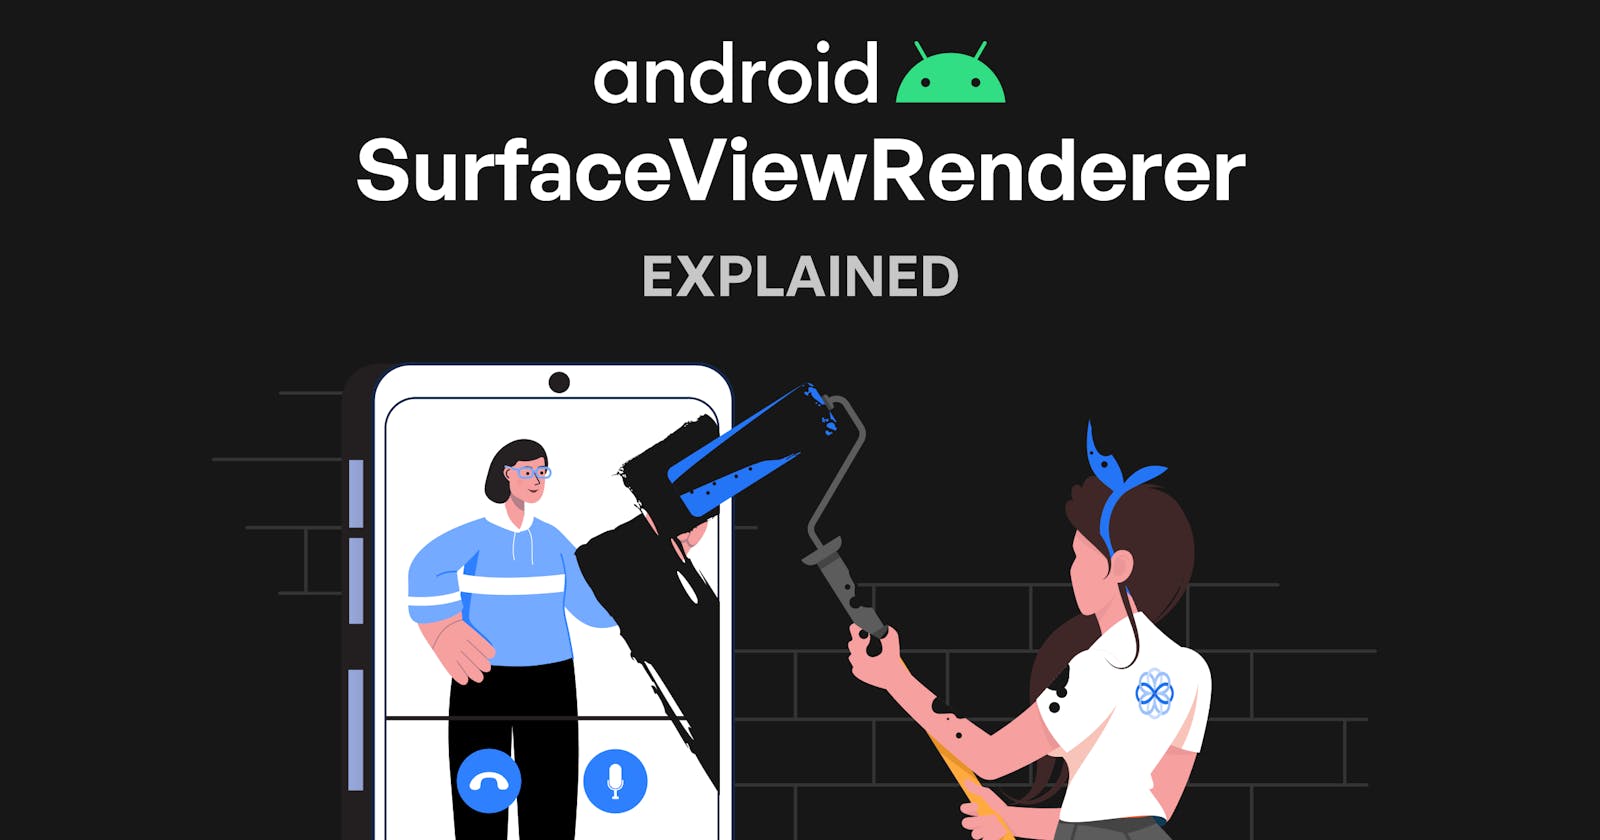 Android SurfaceViewRenderer explained